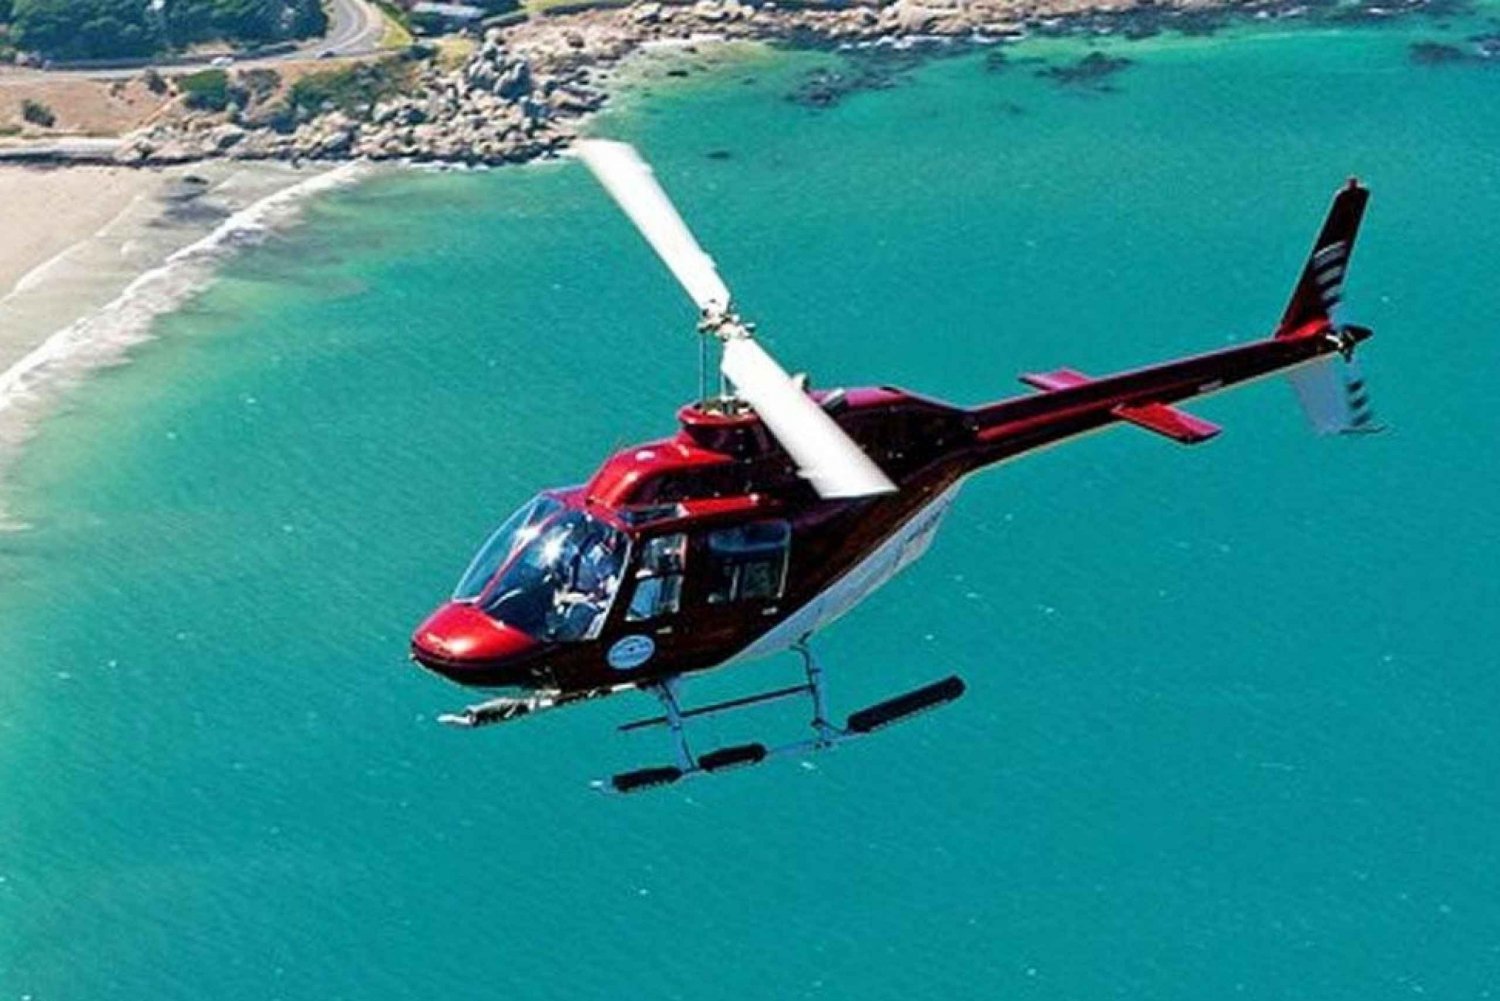 A 16-Minute Camps Bay & Hout Bay Helicopter Flight Day Tour